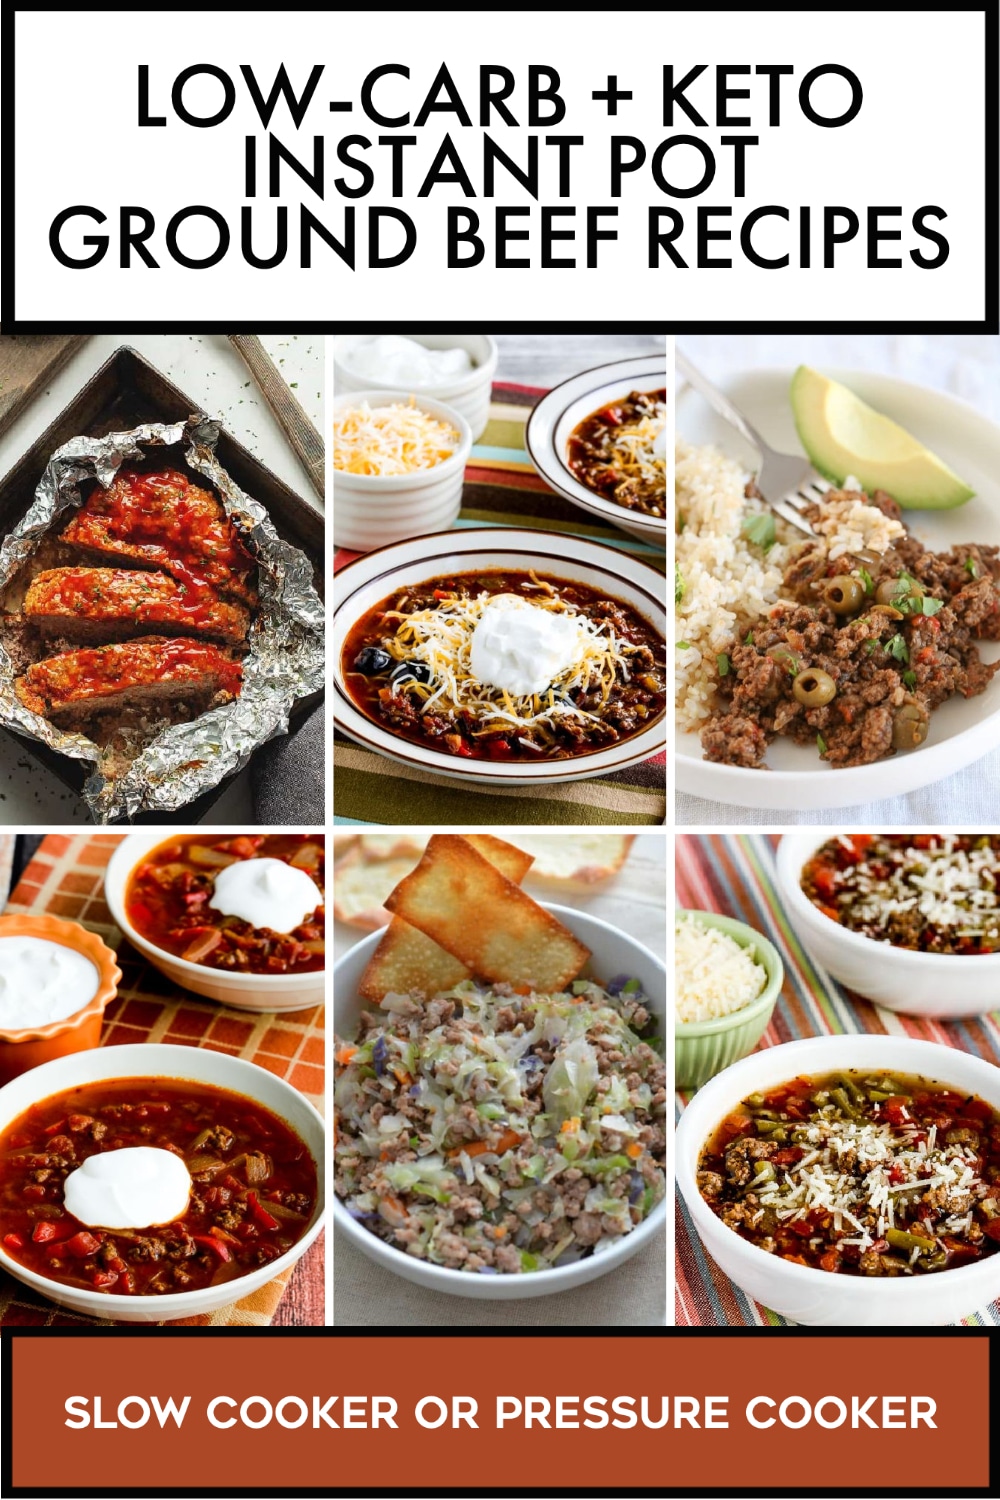 Pinterest image of Low-Carb and Keto Instant Pot Ground Beef Recipes